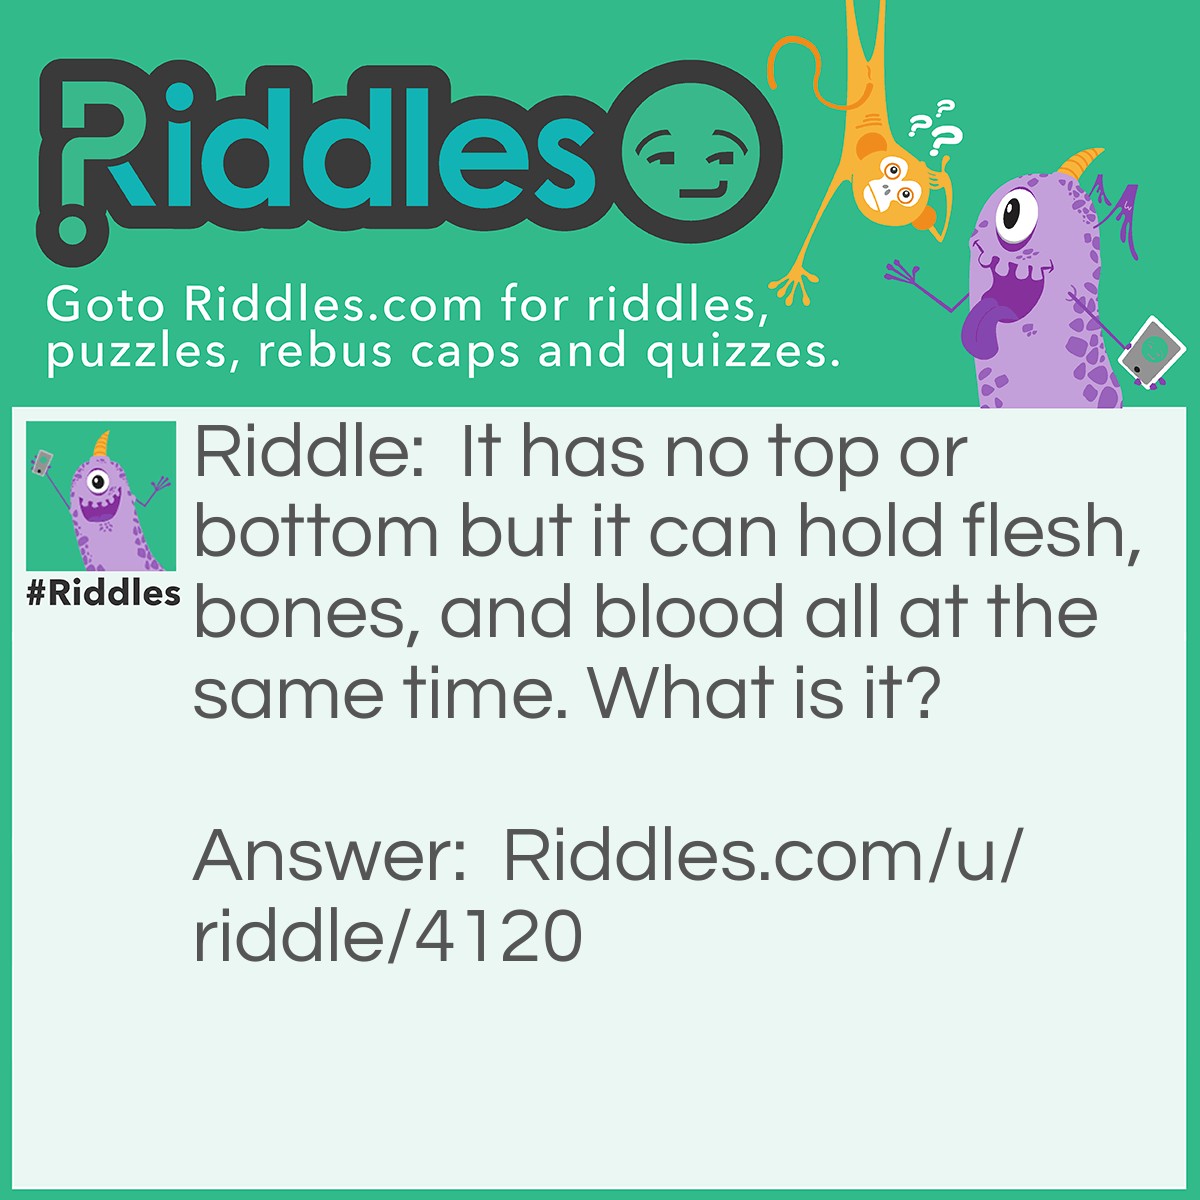 Riddle: It has no top or bottom but it can hold flesh, bones, and blood all at the same time. What is it? Answer: A ring.